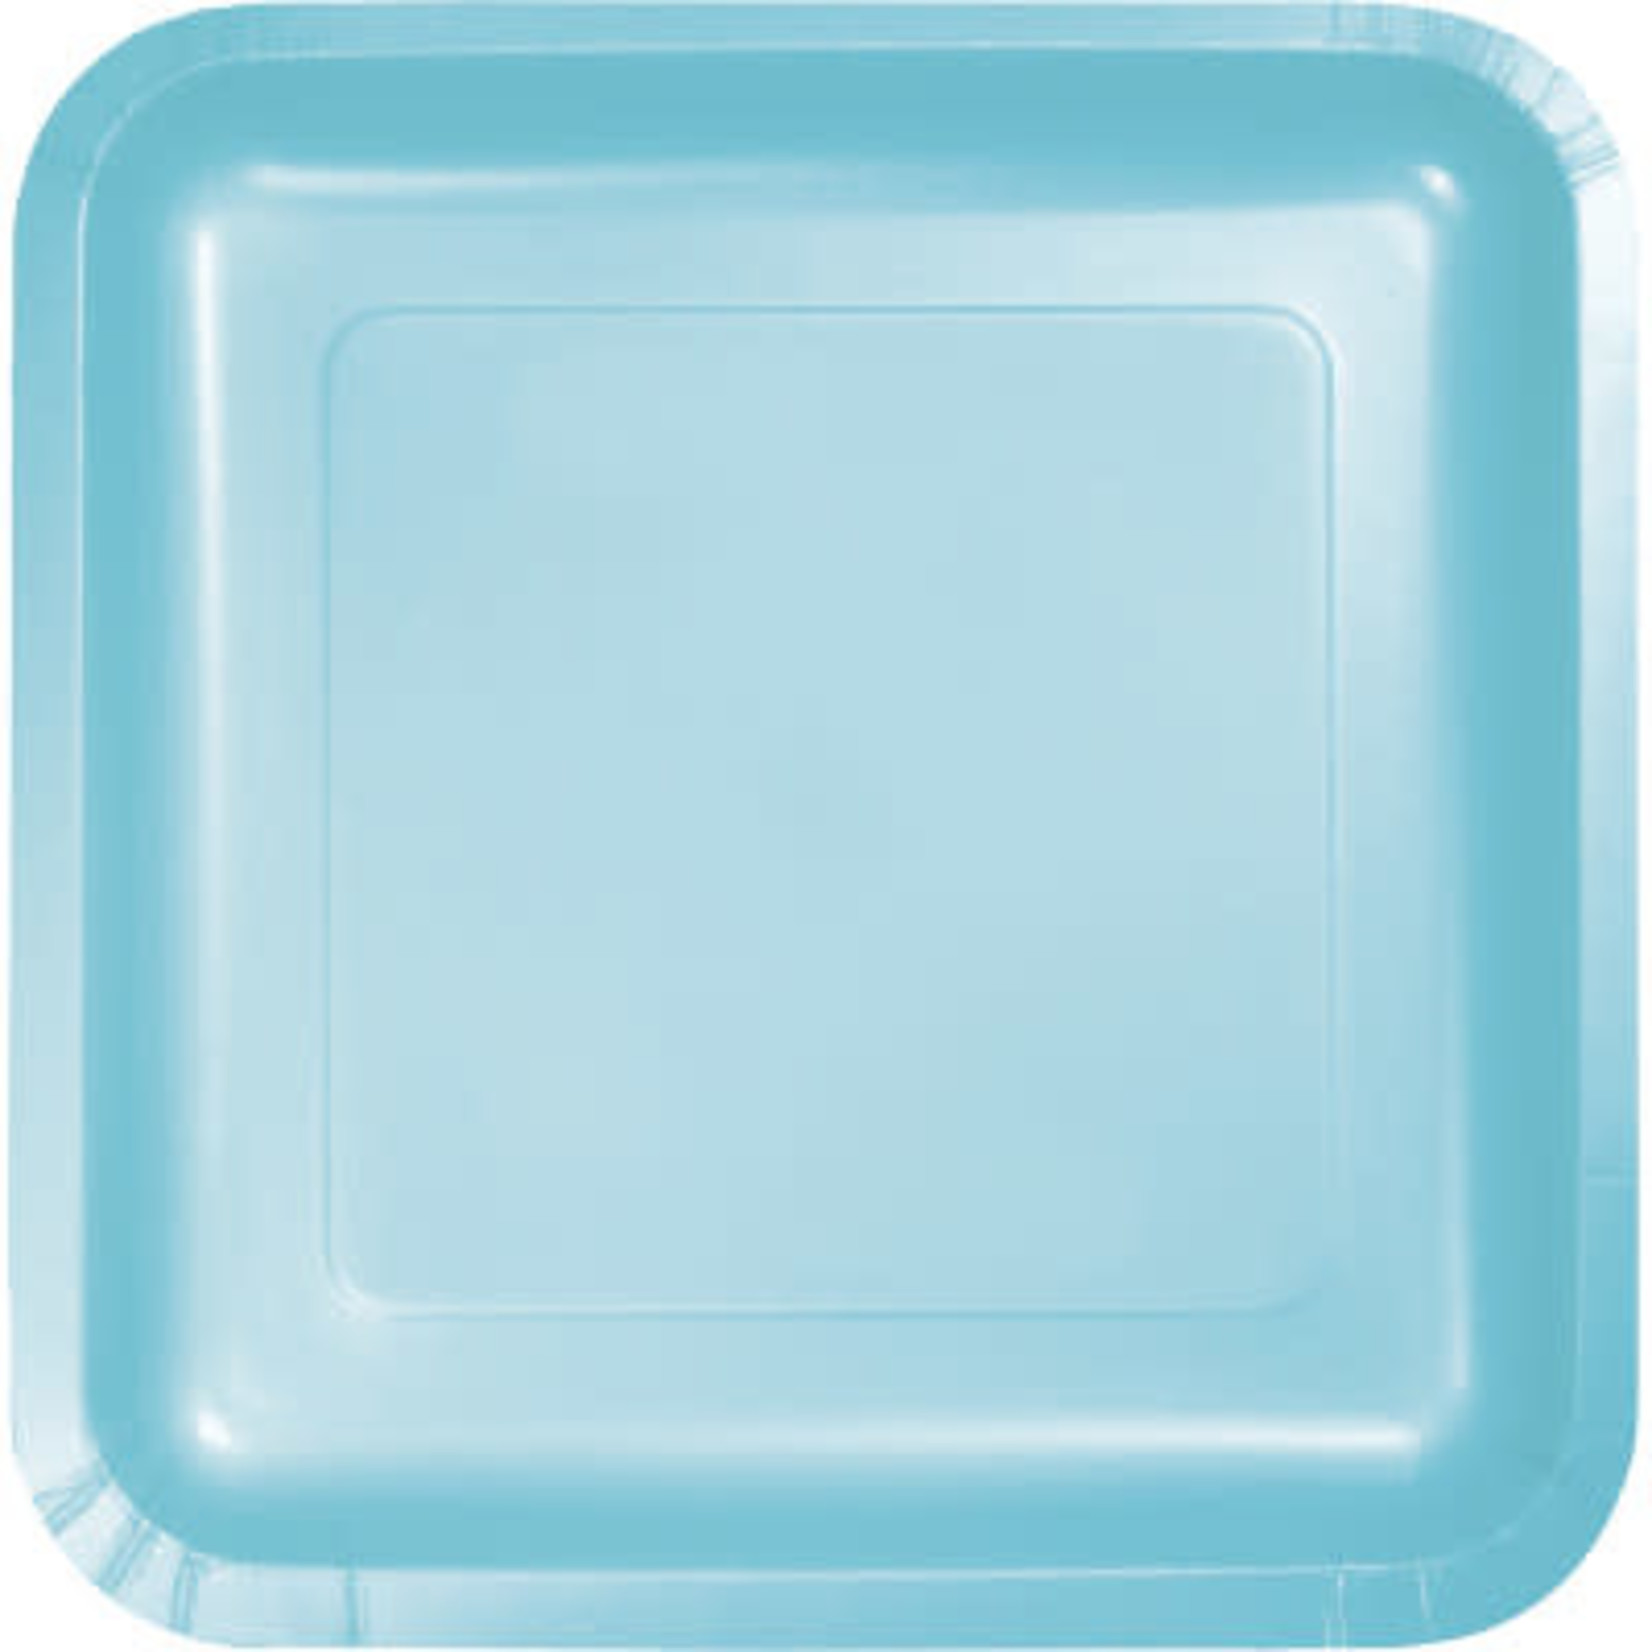 Touch of Color 9" Pastel Blue Square Paper Plates - 18ct.